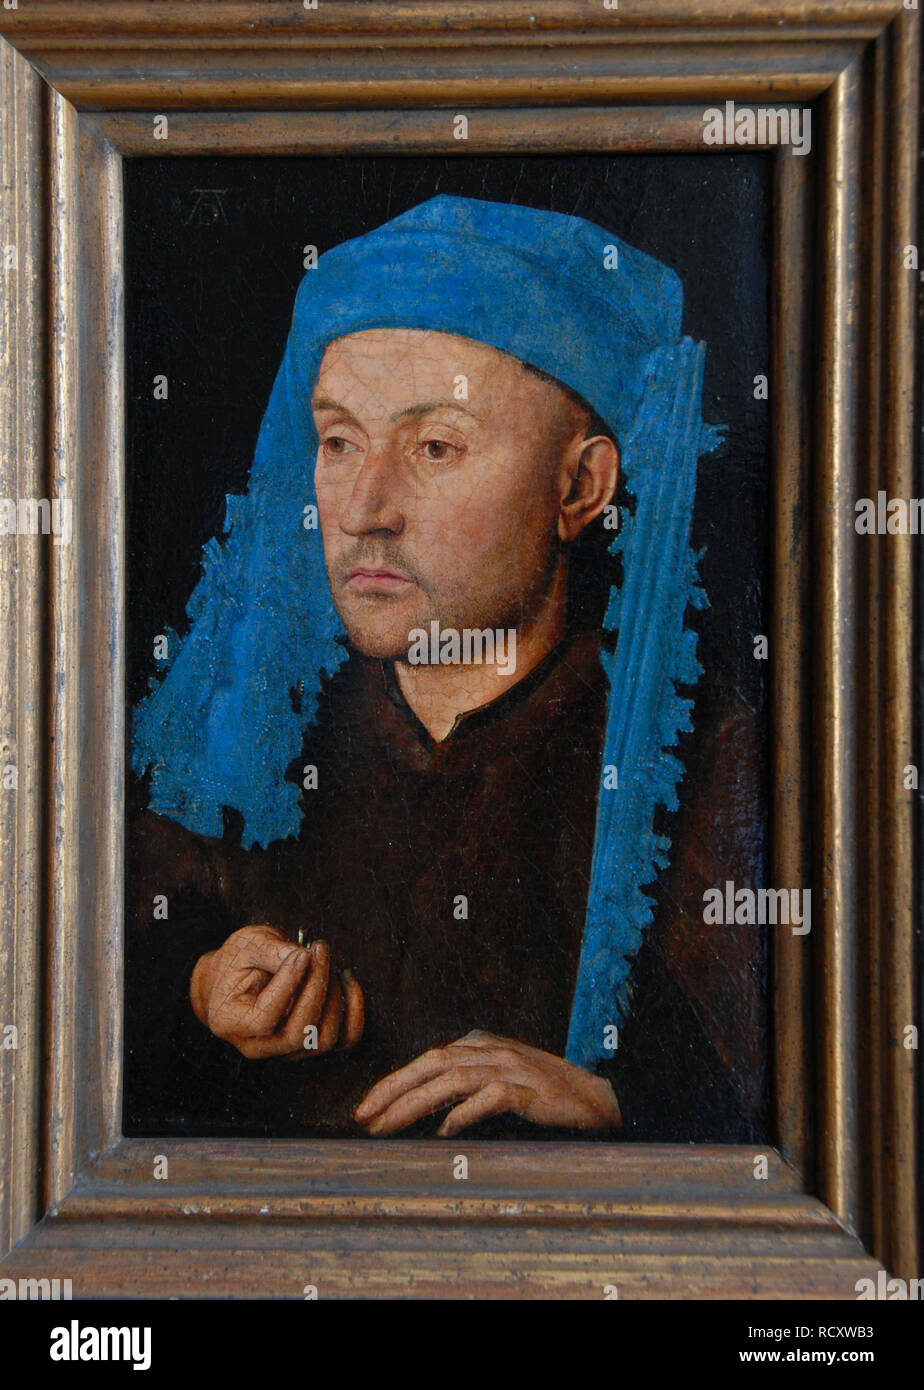 Portrait of a man with a blue chaperon (Man with Ring). Museum: Muzeul National Brukenthal, Sibiu. Author: VAN EYCK, JAN. Stock Photo